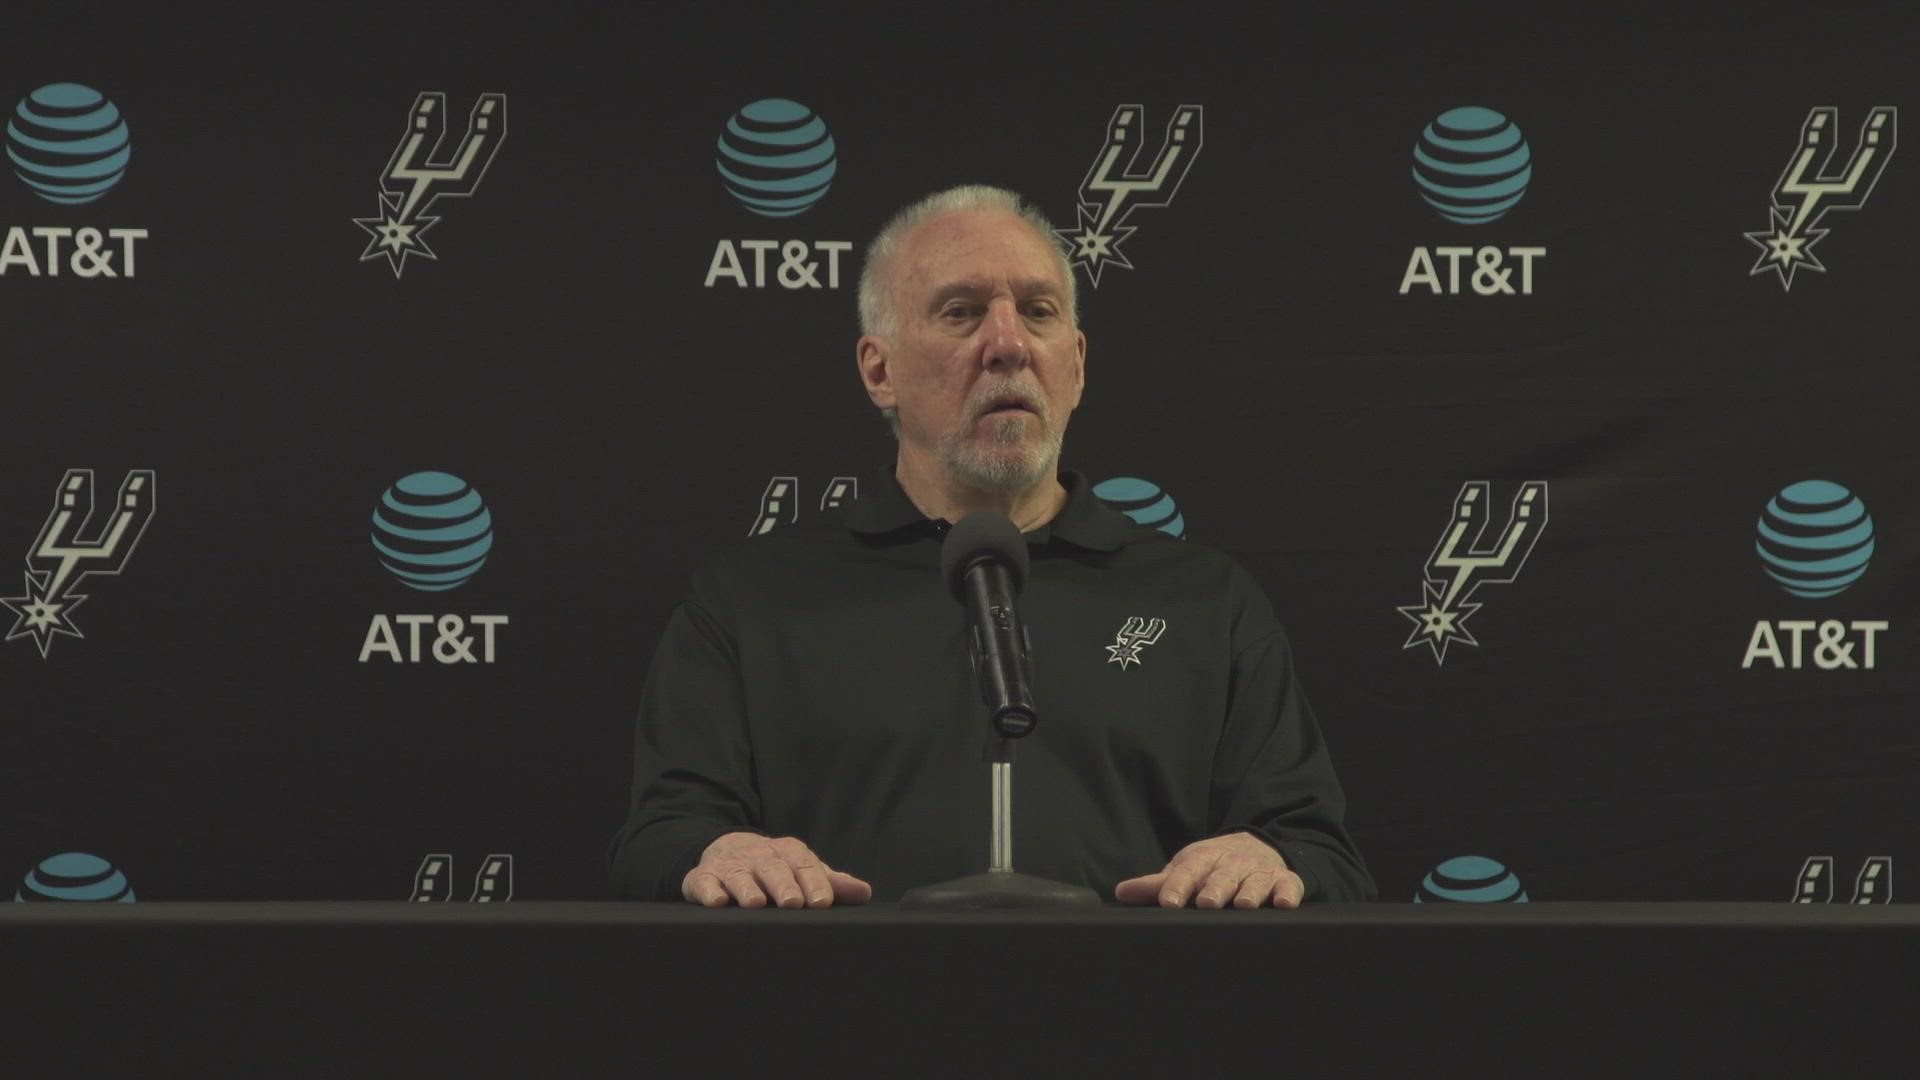 Pop heaped praise on Phoenix, and called Chris Paul a Hall of Fame player.